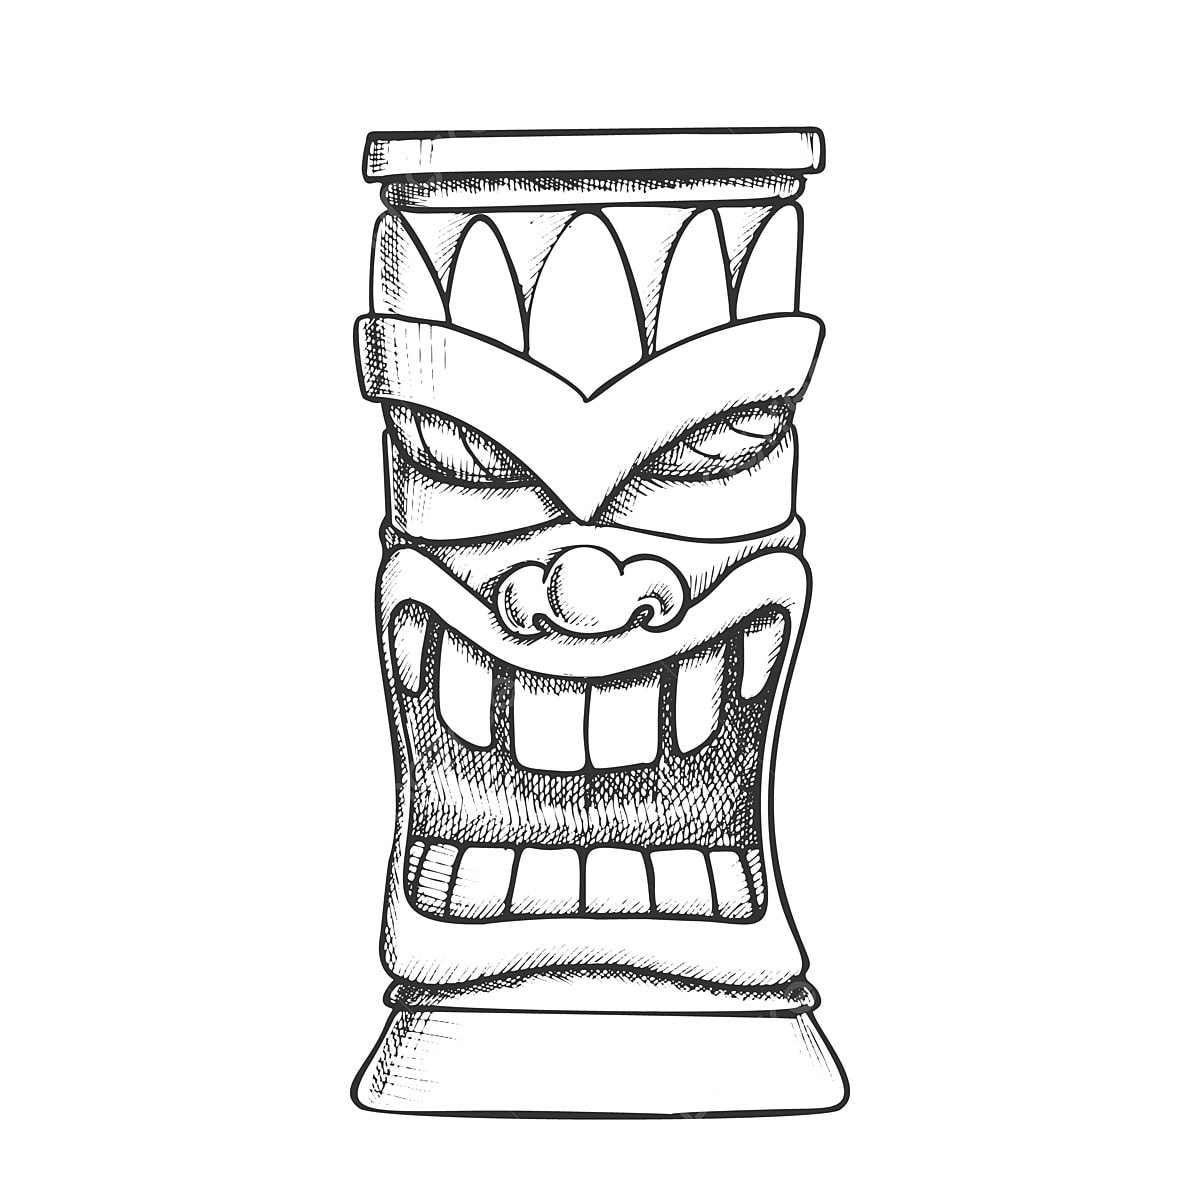 Tiki idol carved wooden totem monochrome vector wooden drawing wooden sketch tiki png and vector with transparent background for free download